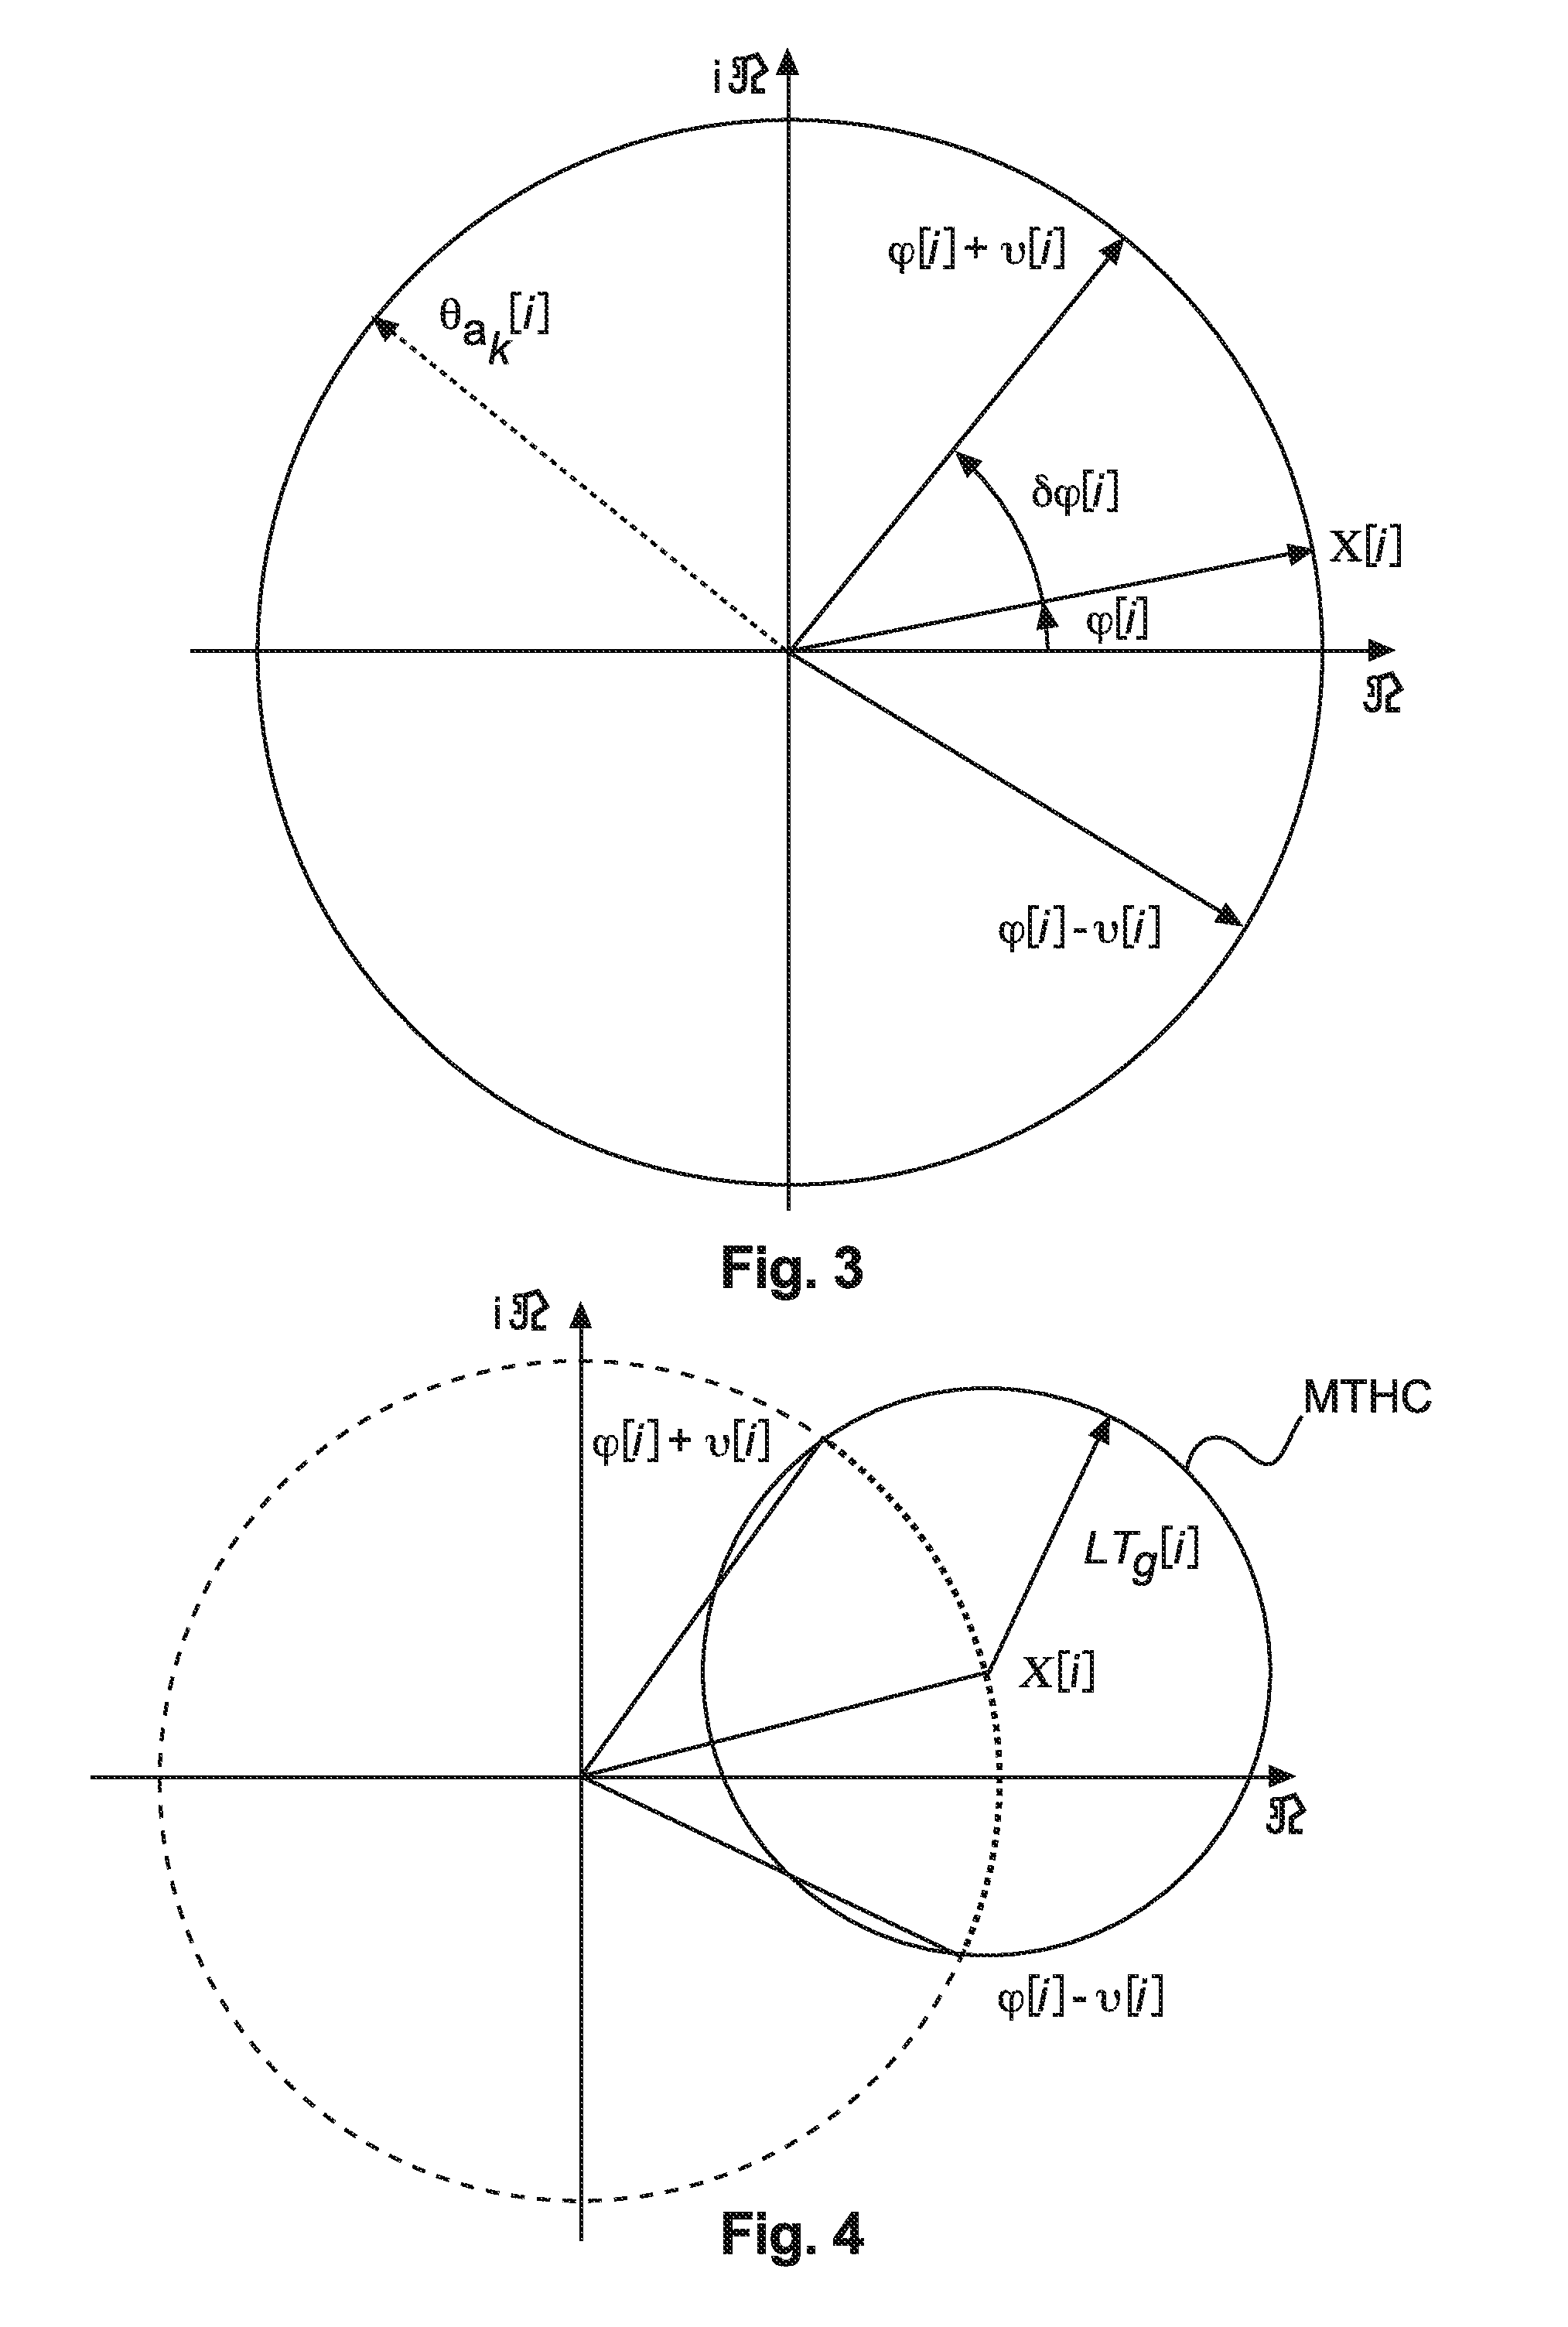 Method and apparatus for increasing the strength of phase-based watermarking of an audio signal